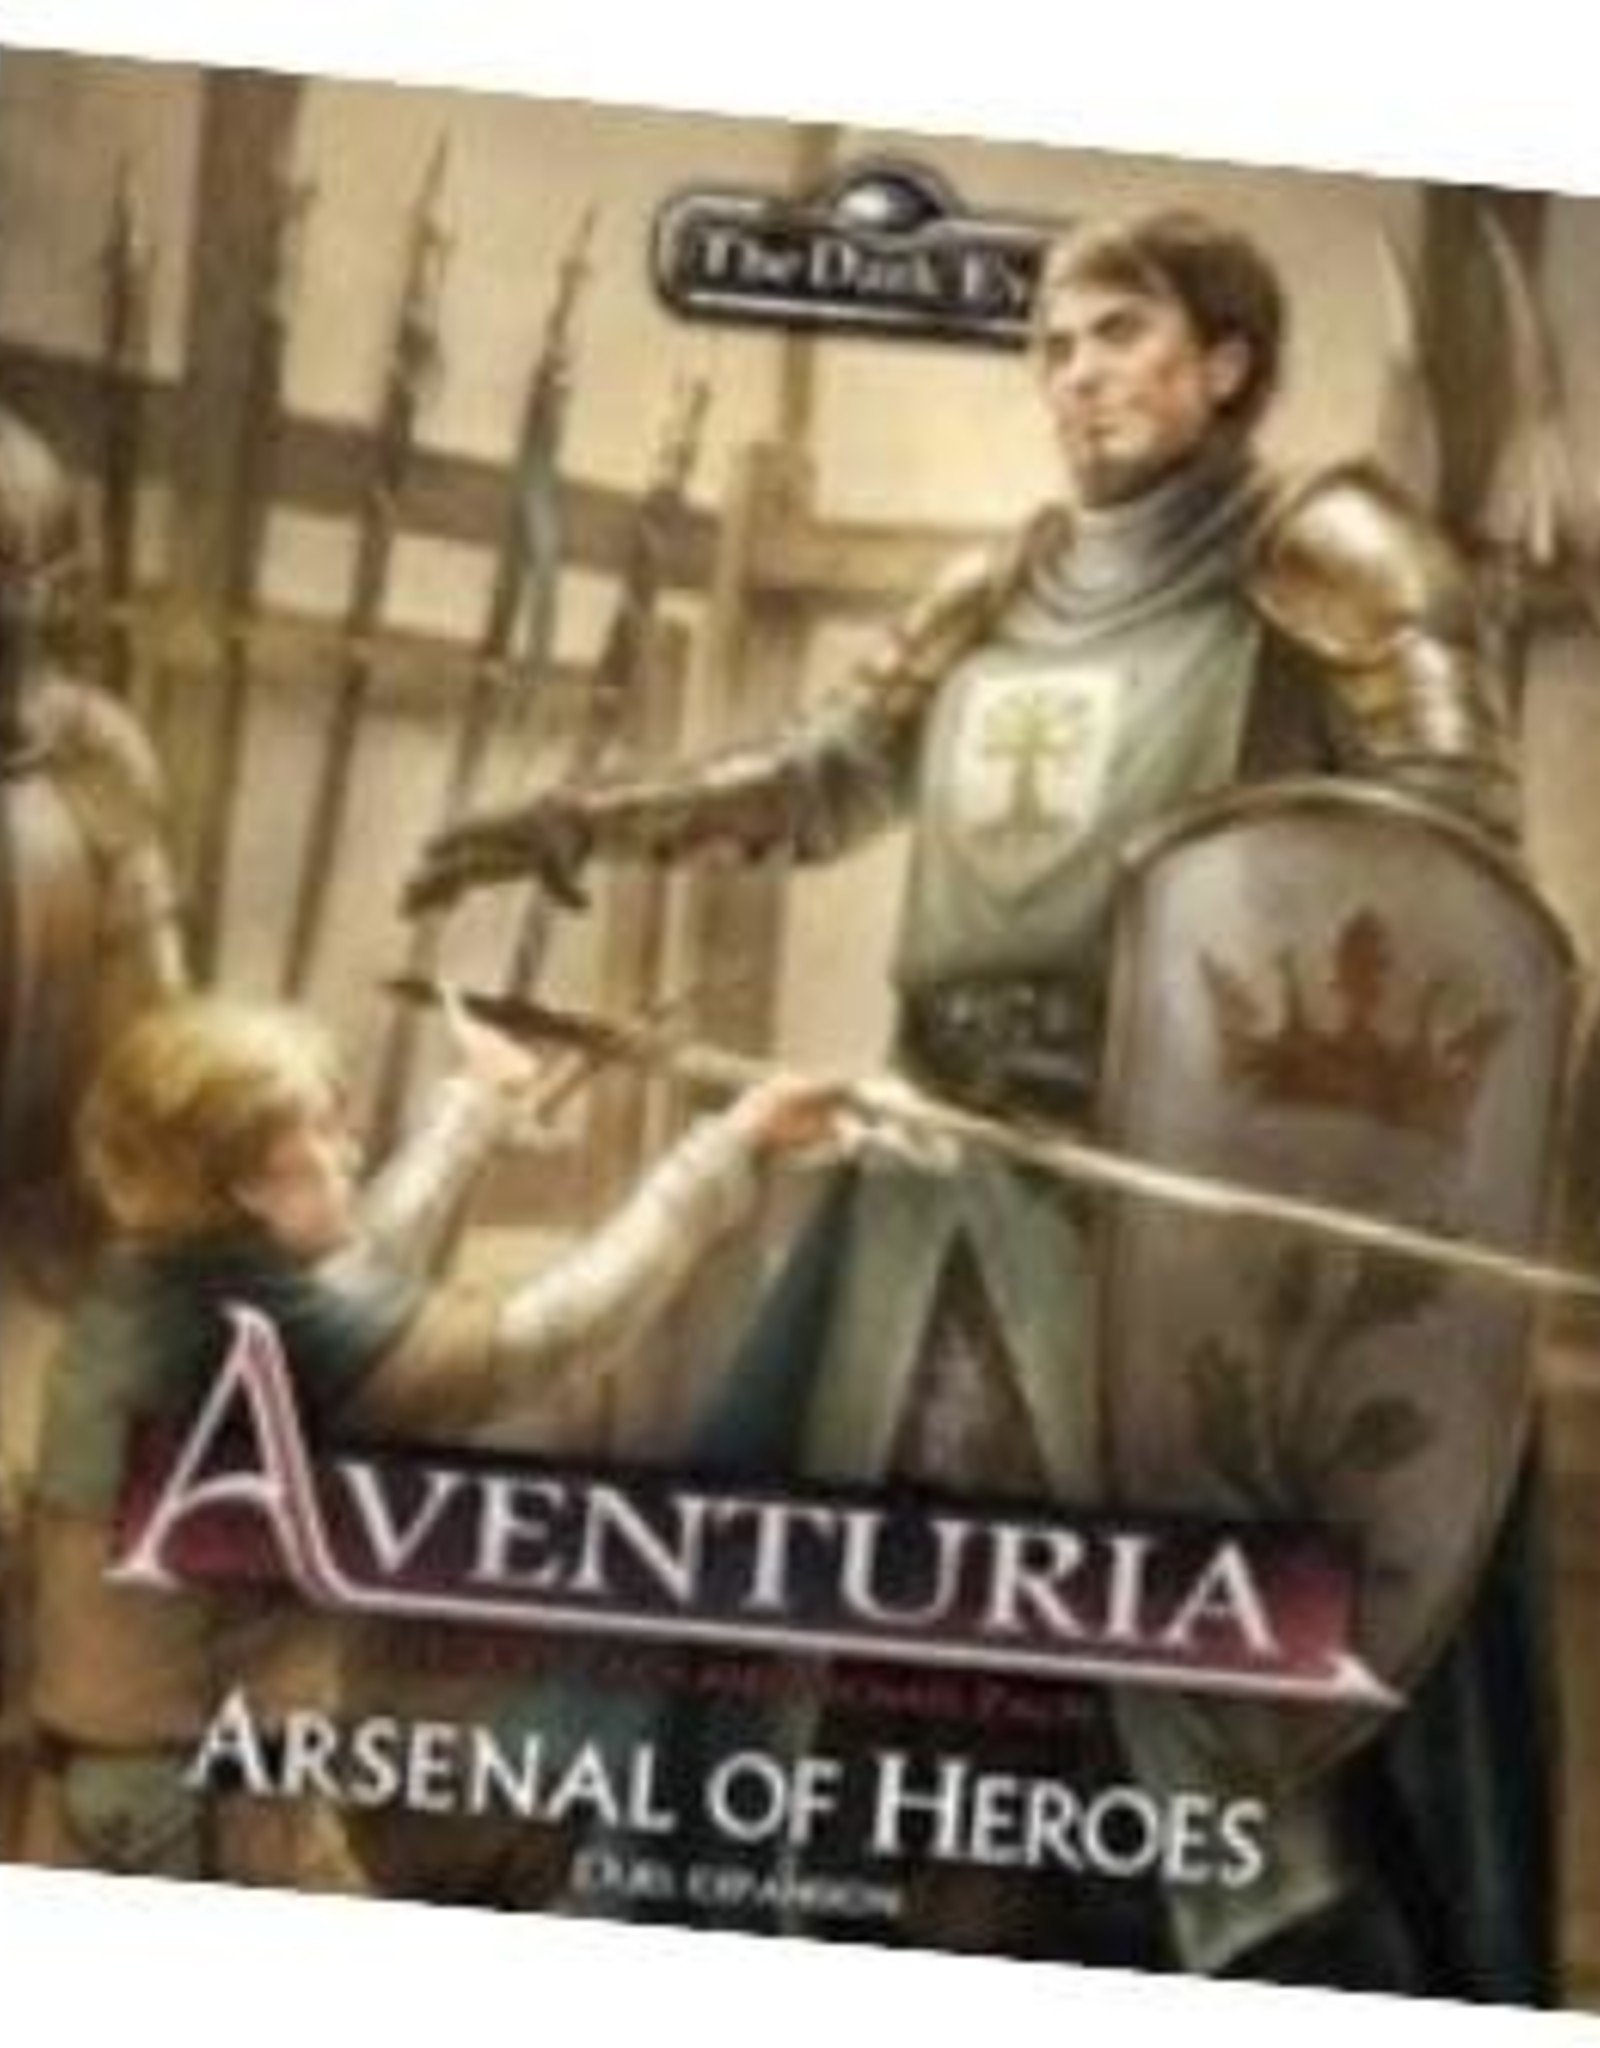 The Dark Eye: Aventuria Adventure Card Game - Arsenal of Heroes Duel Expansion